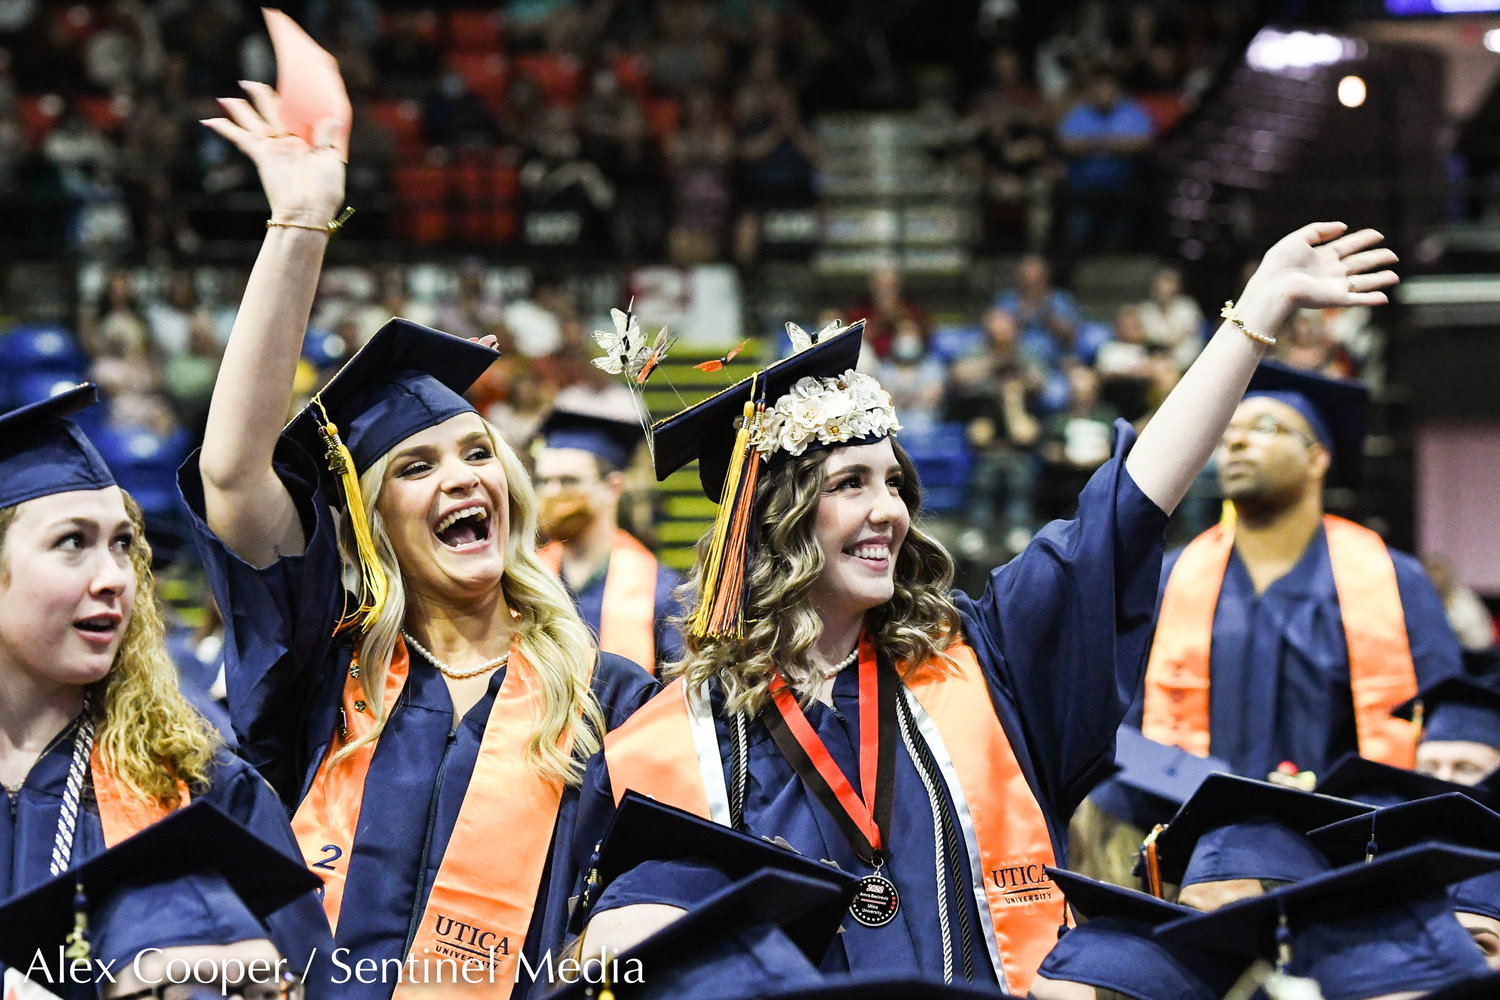 From left, Utica University graduates Verona Deliu and Amra Becirevic wave to family and loved ones in the crowd during the school's undergraduate commencement ceremony on Thursday, May 12 at the Adirondack Bank Center at the Utica Memorial Auditorium.